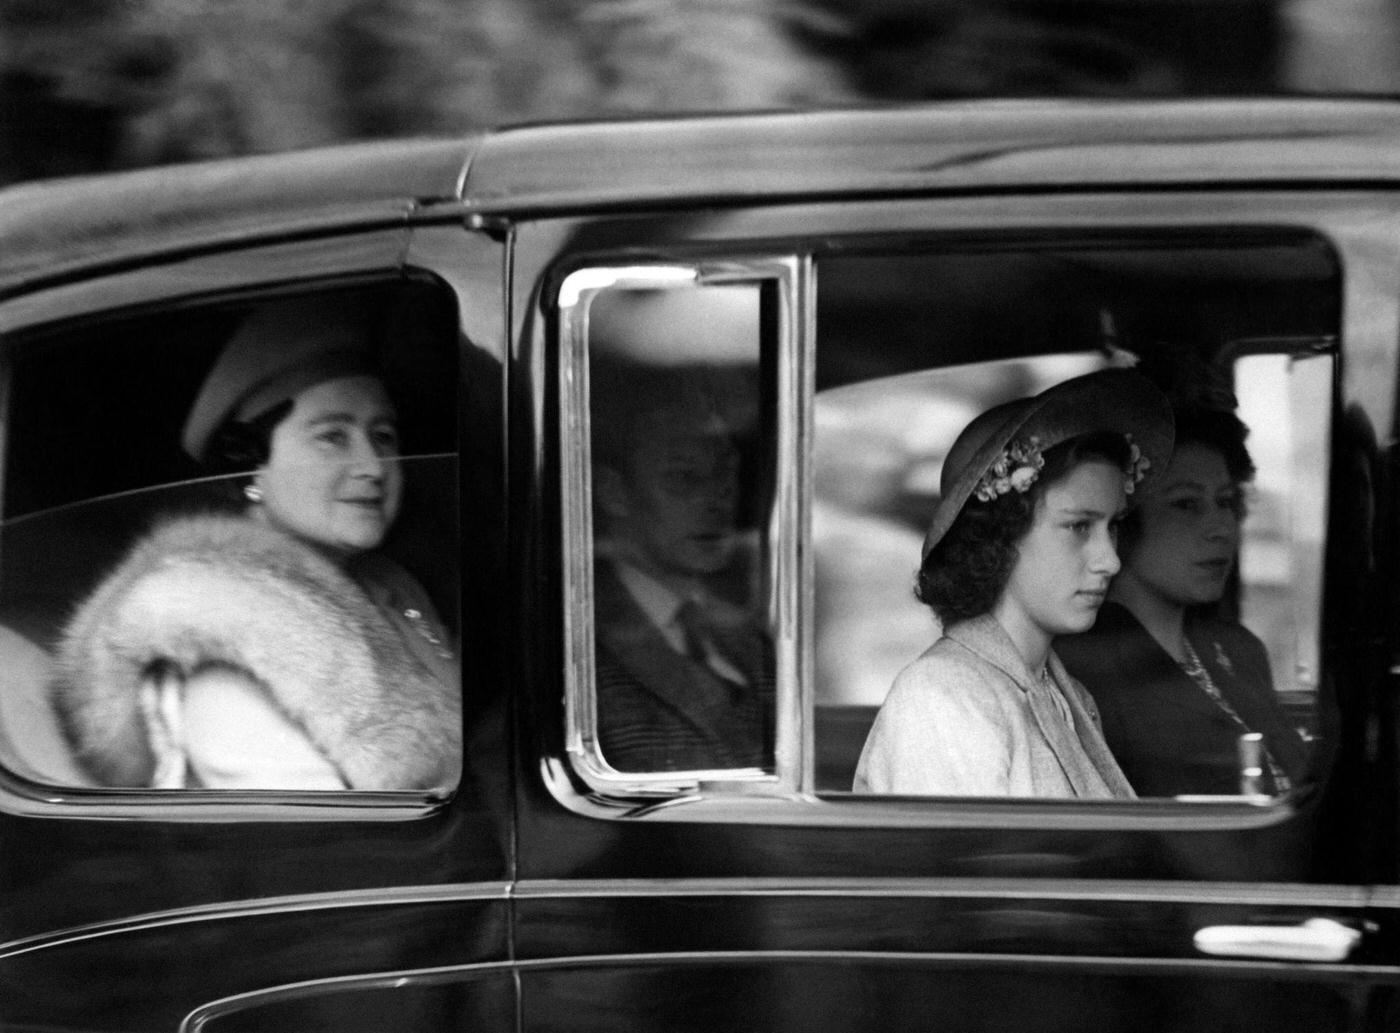 King George VI and family arrive at Balmoral for their holidays in Scotland